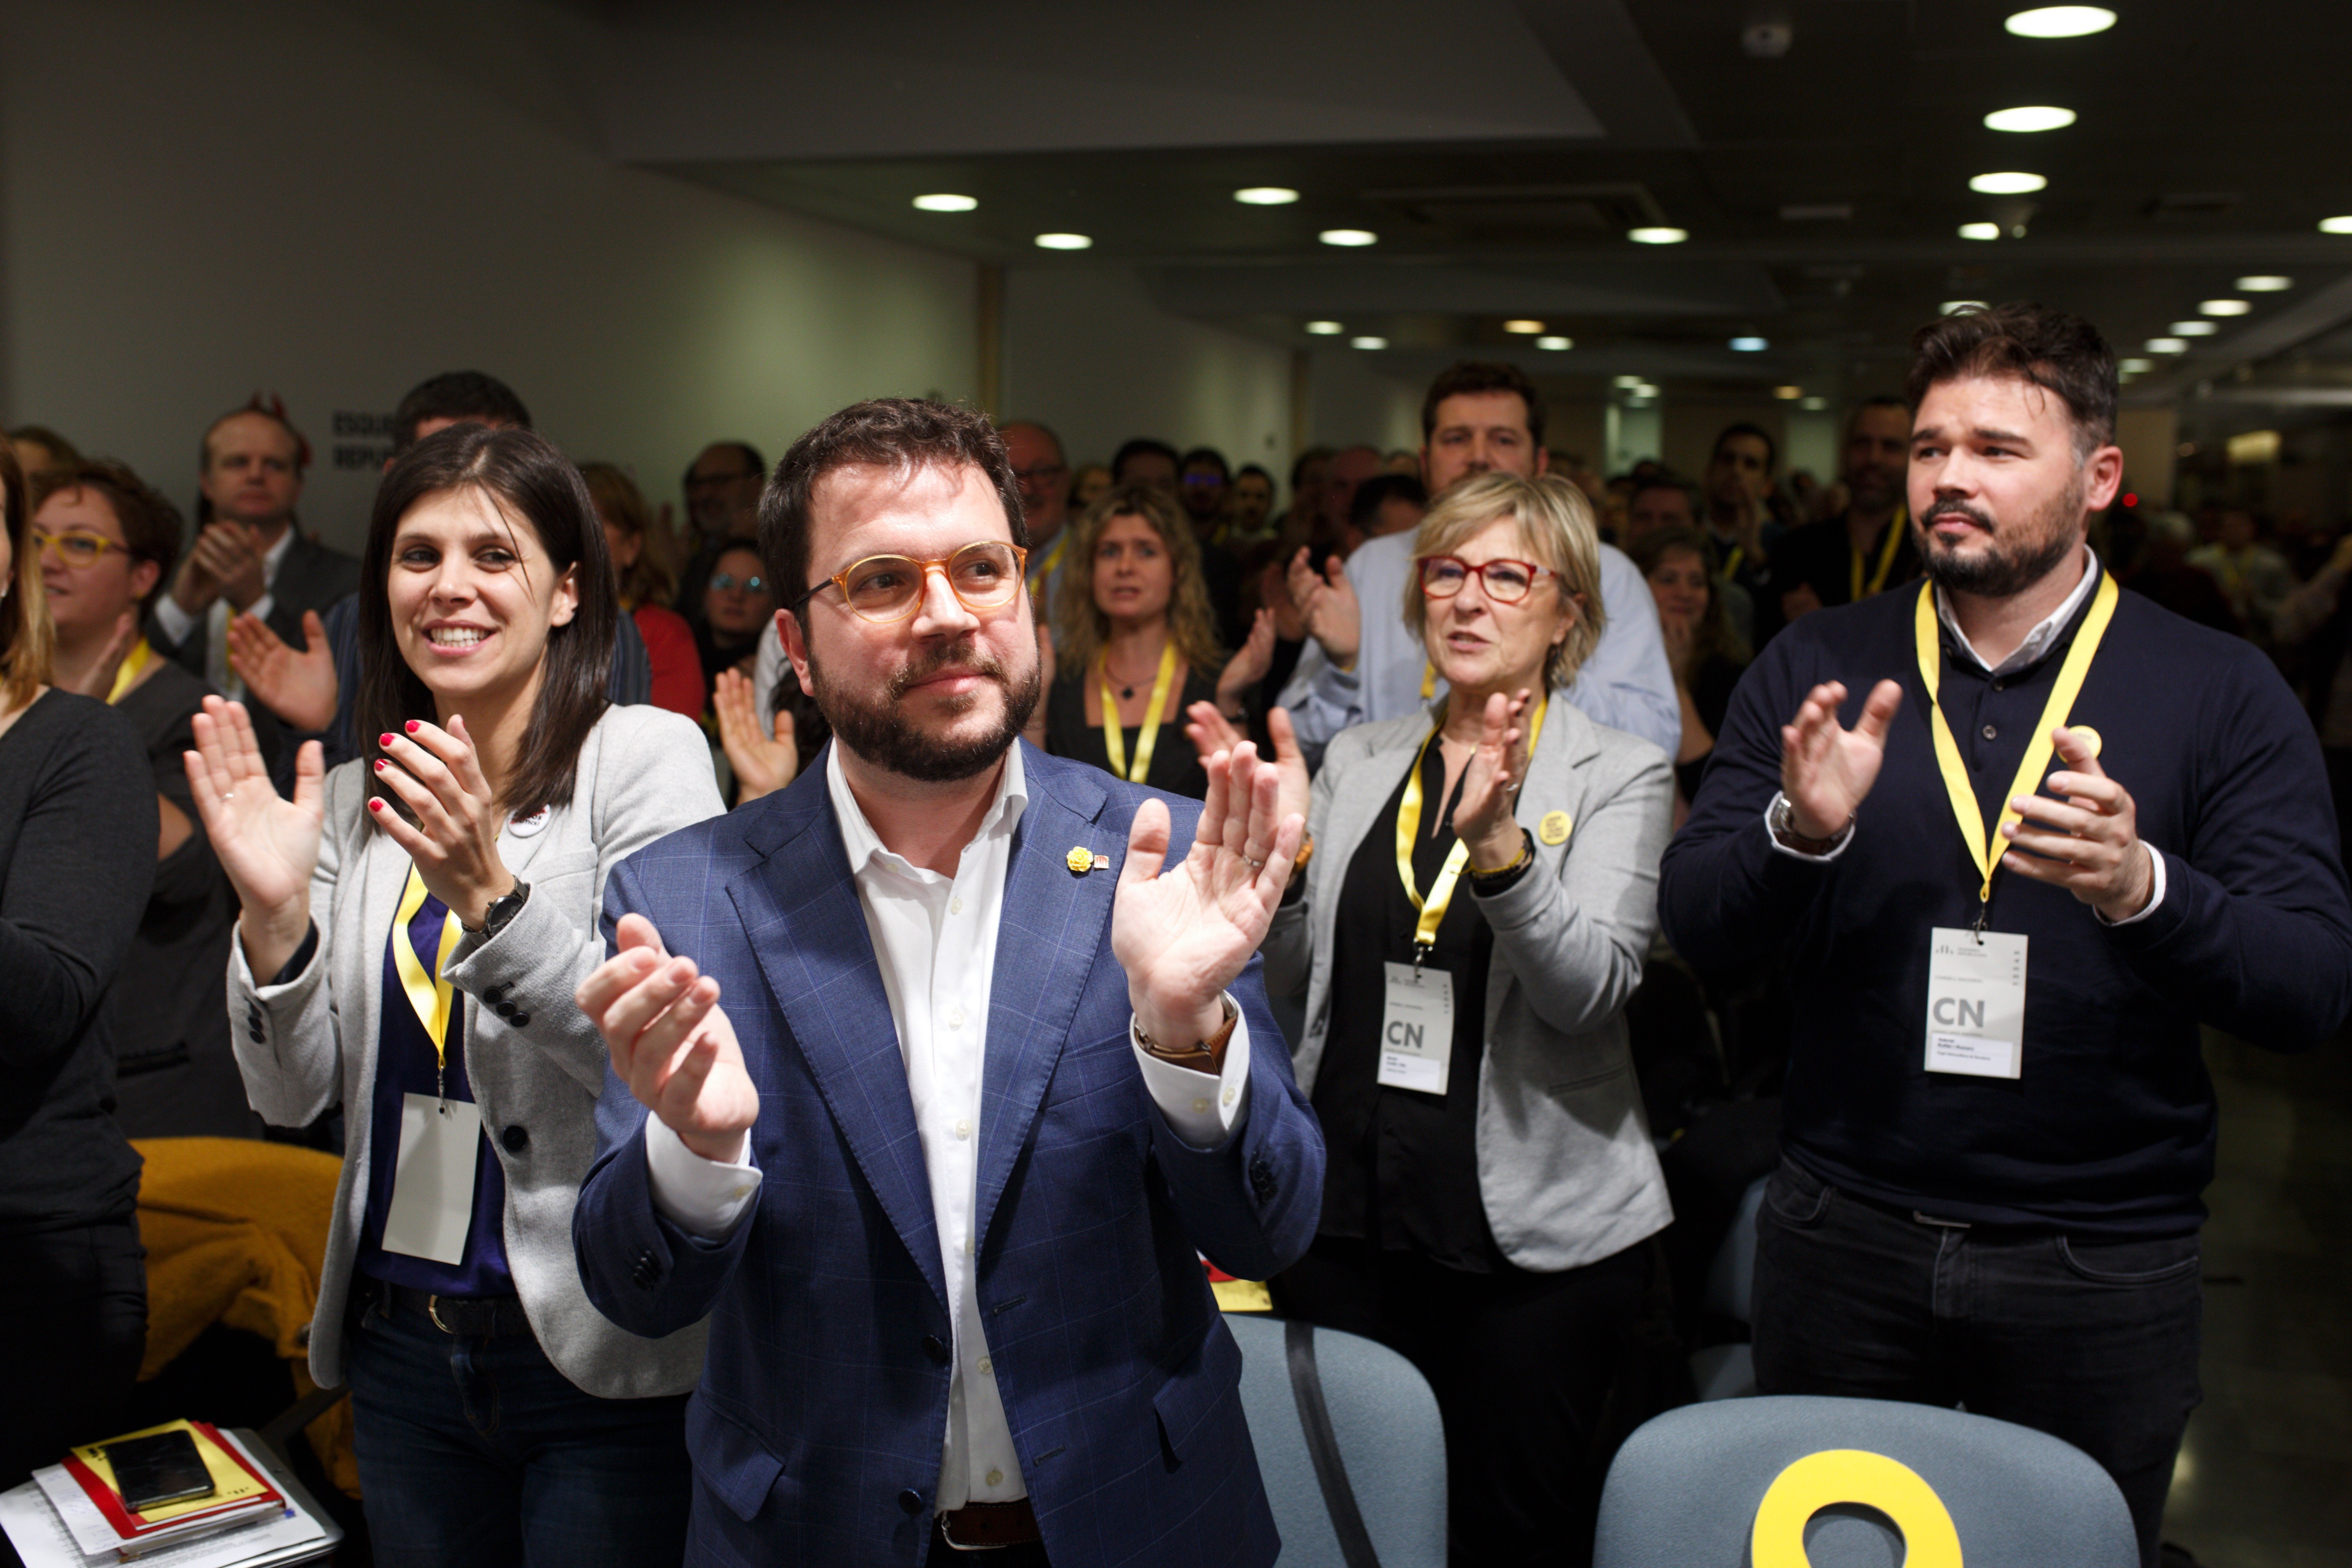 "We'll take the risk": Catalan party ERC gives green light to a new Spanish government